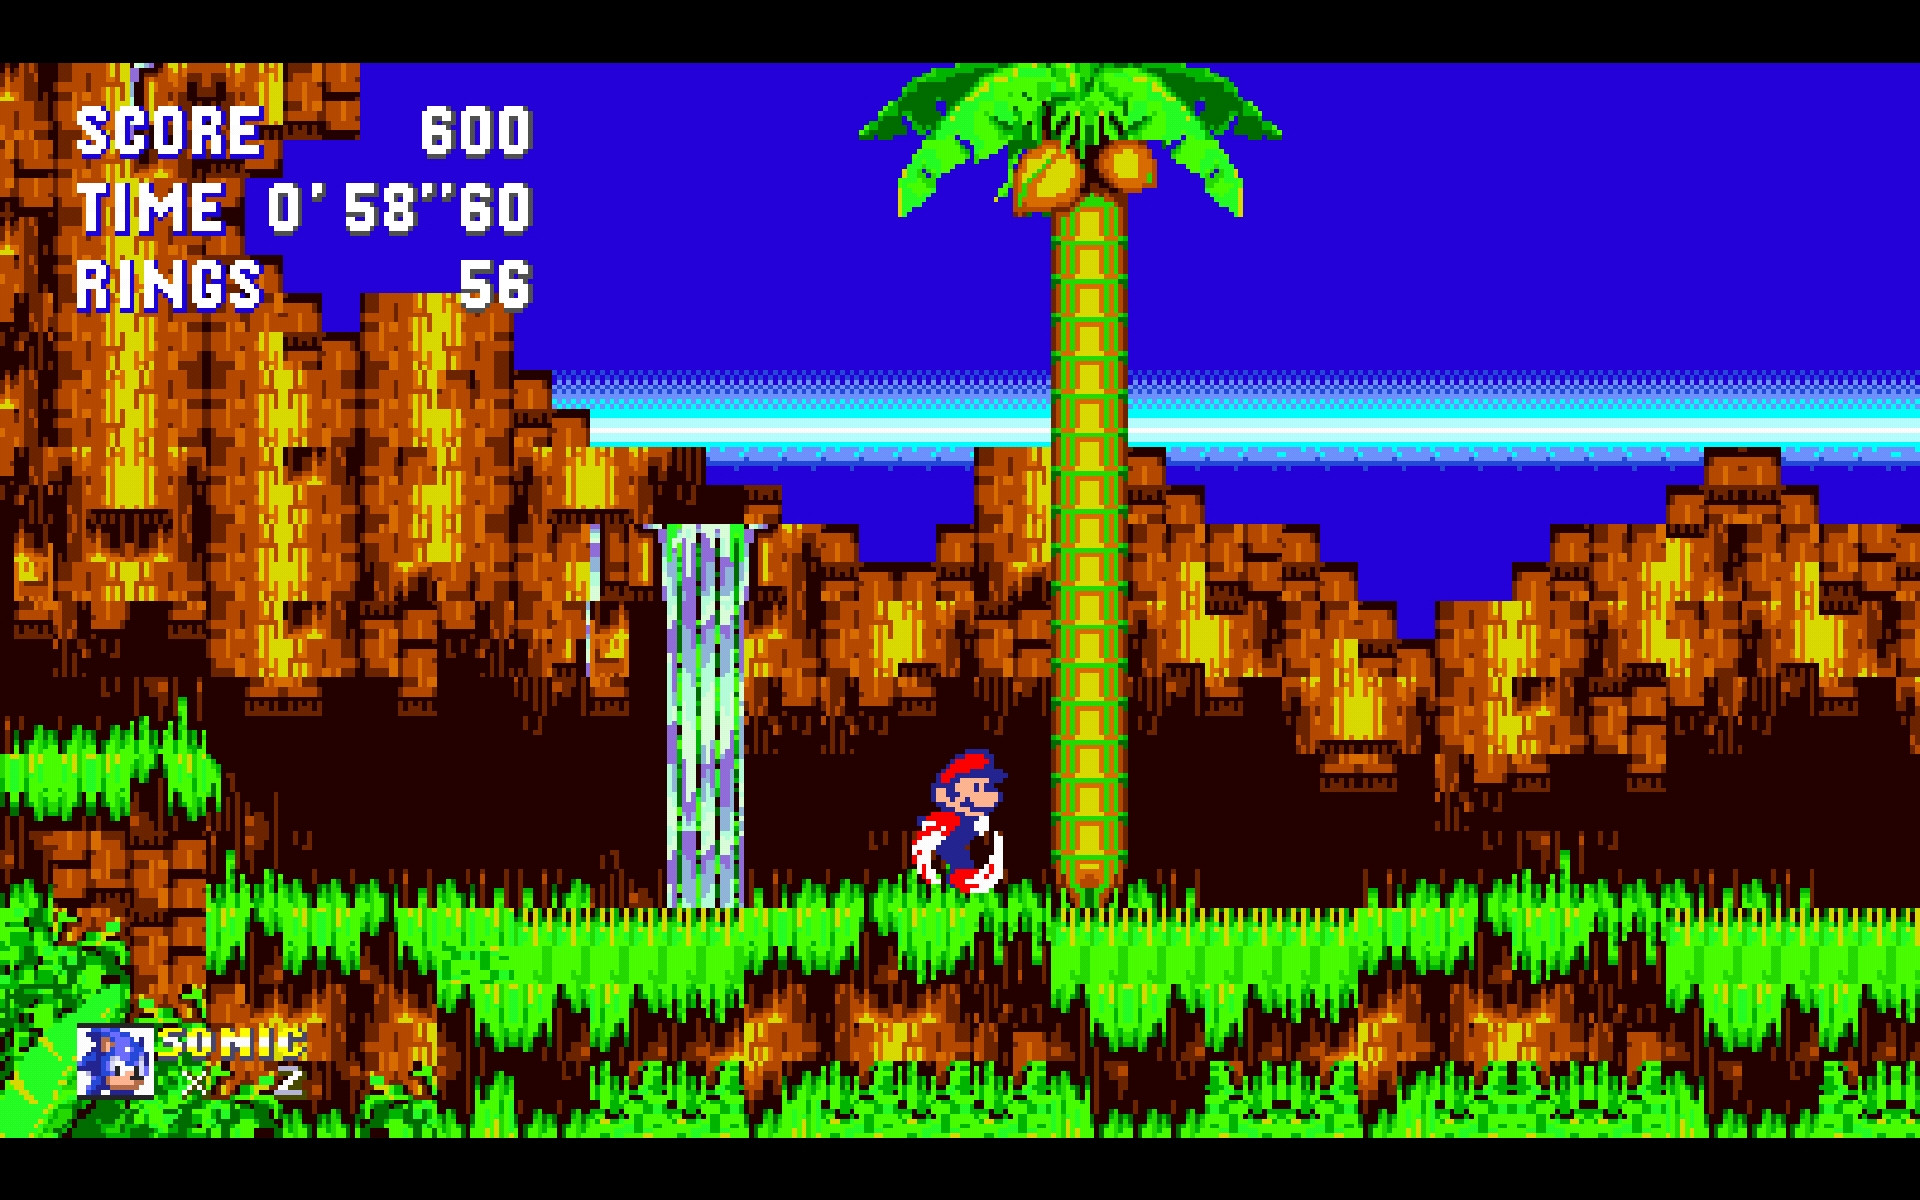 Sonic 3 air knuckles. Sonic 3 Air. Sonic 3 a.i.r. Angel Island Sonic 3 Air фон. Sonic 3 a.i.r. (Angel Island revisited).